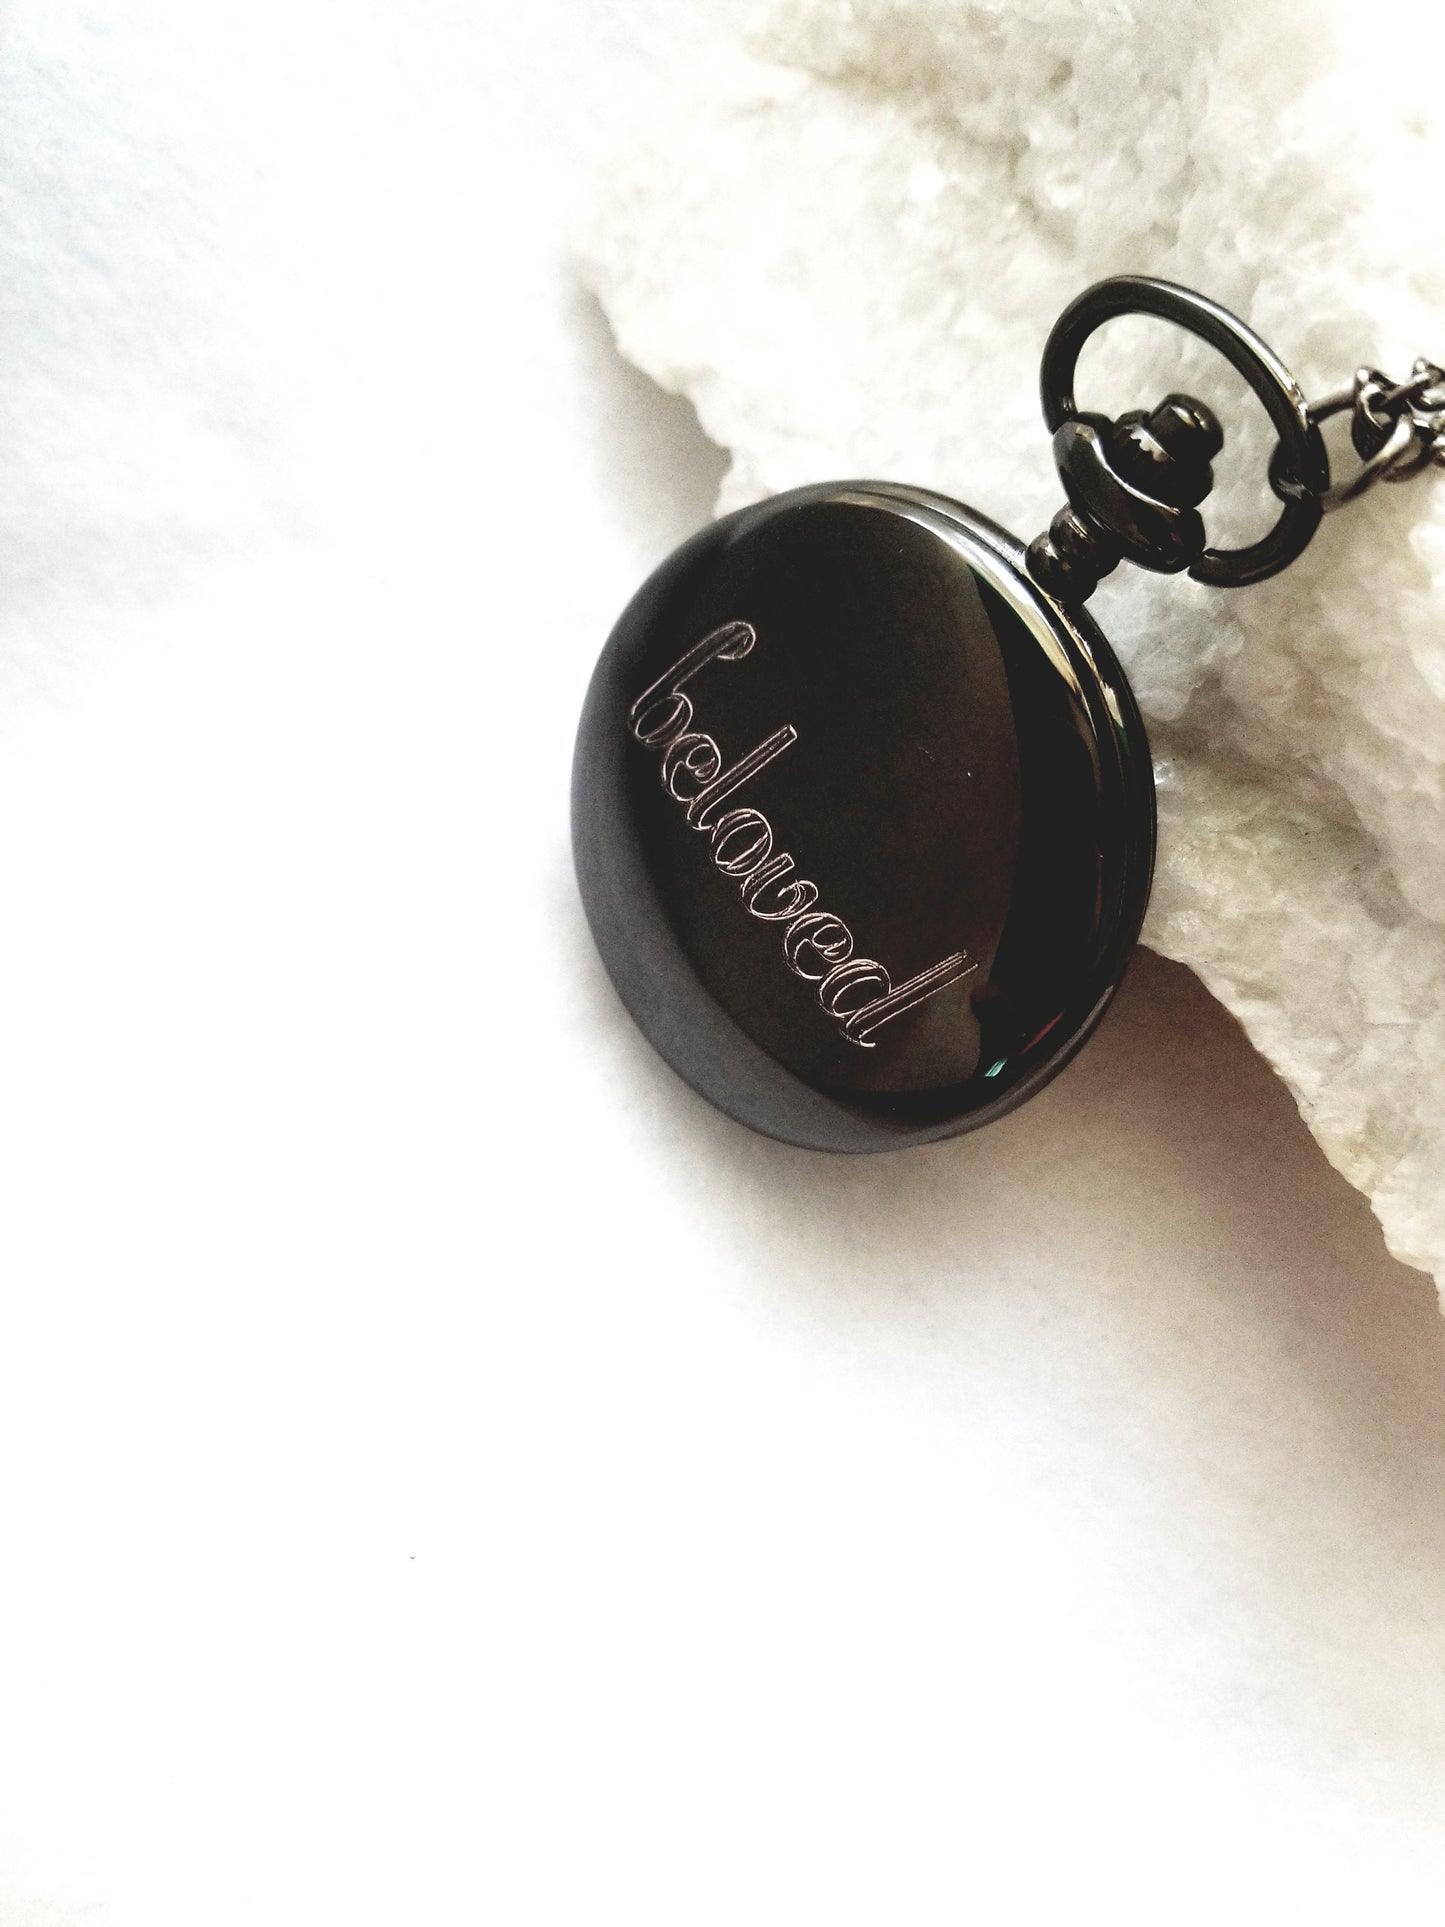 Actual Handwriting watch, custom pocket watch, father's day gift, steampunk.